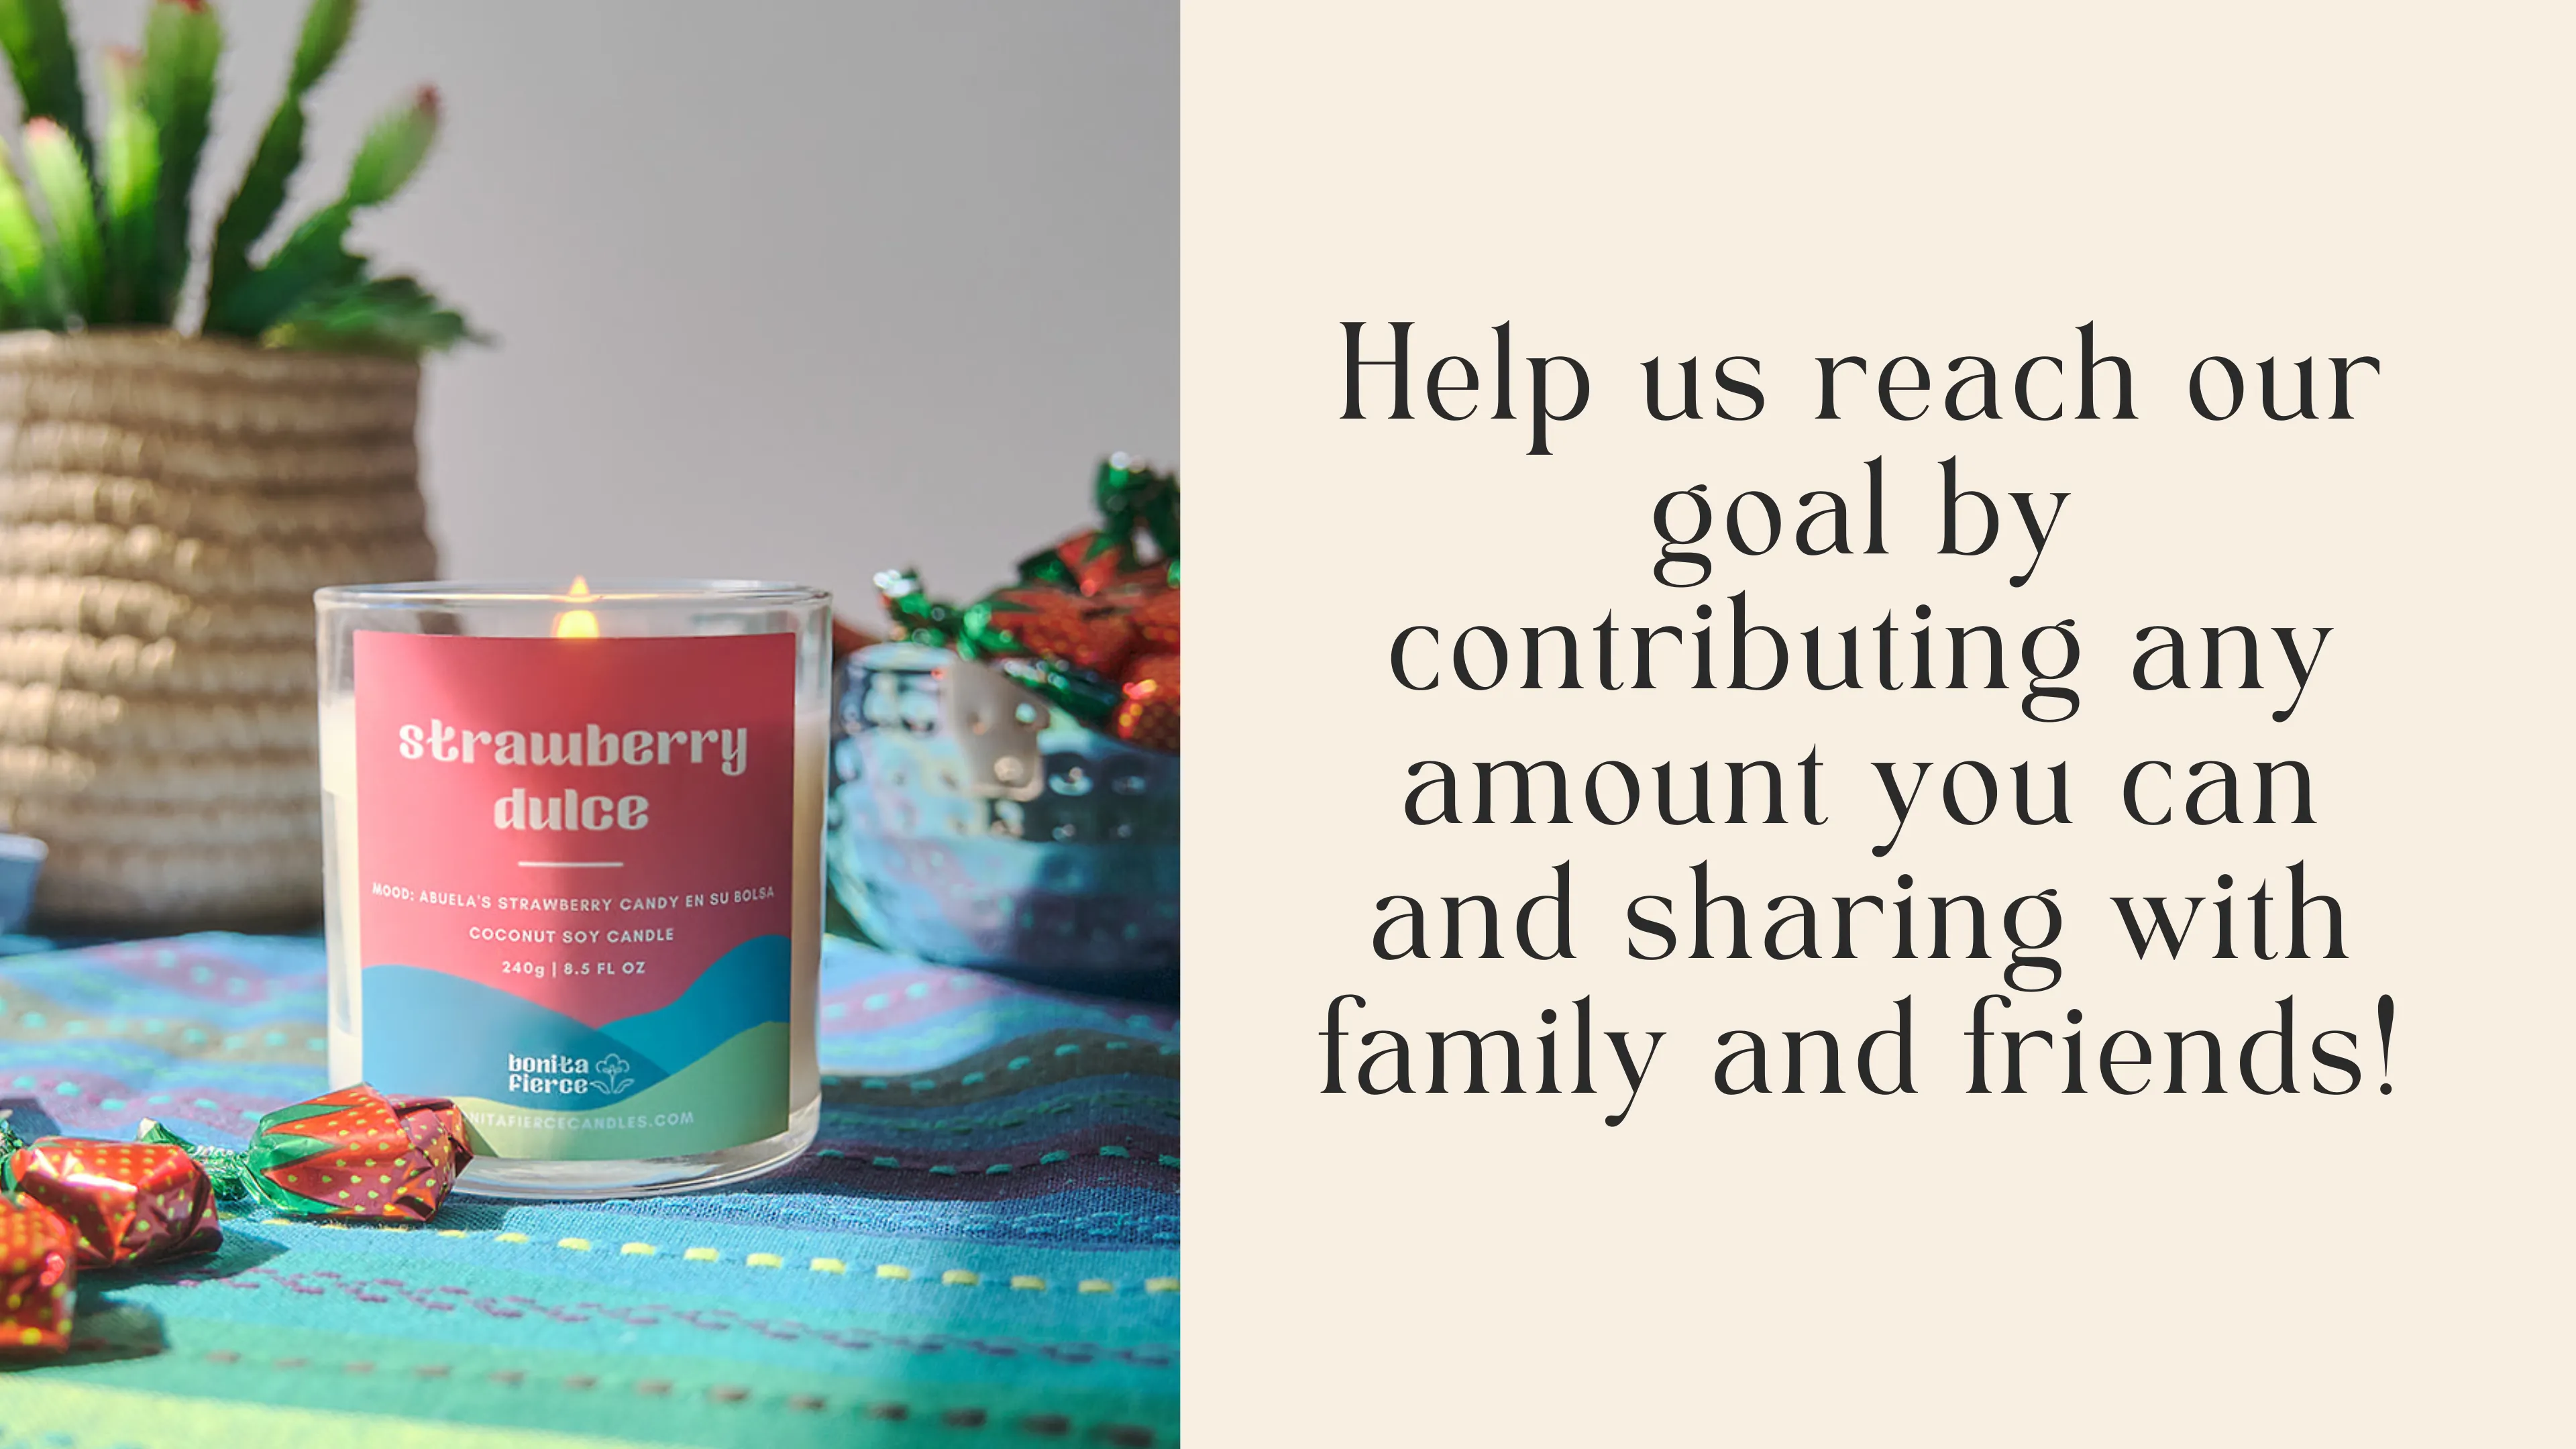 Help us reach our goal by contributing any amount you can and sharing with family and friends!